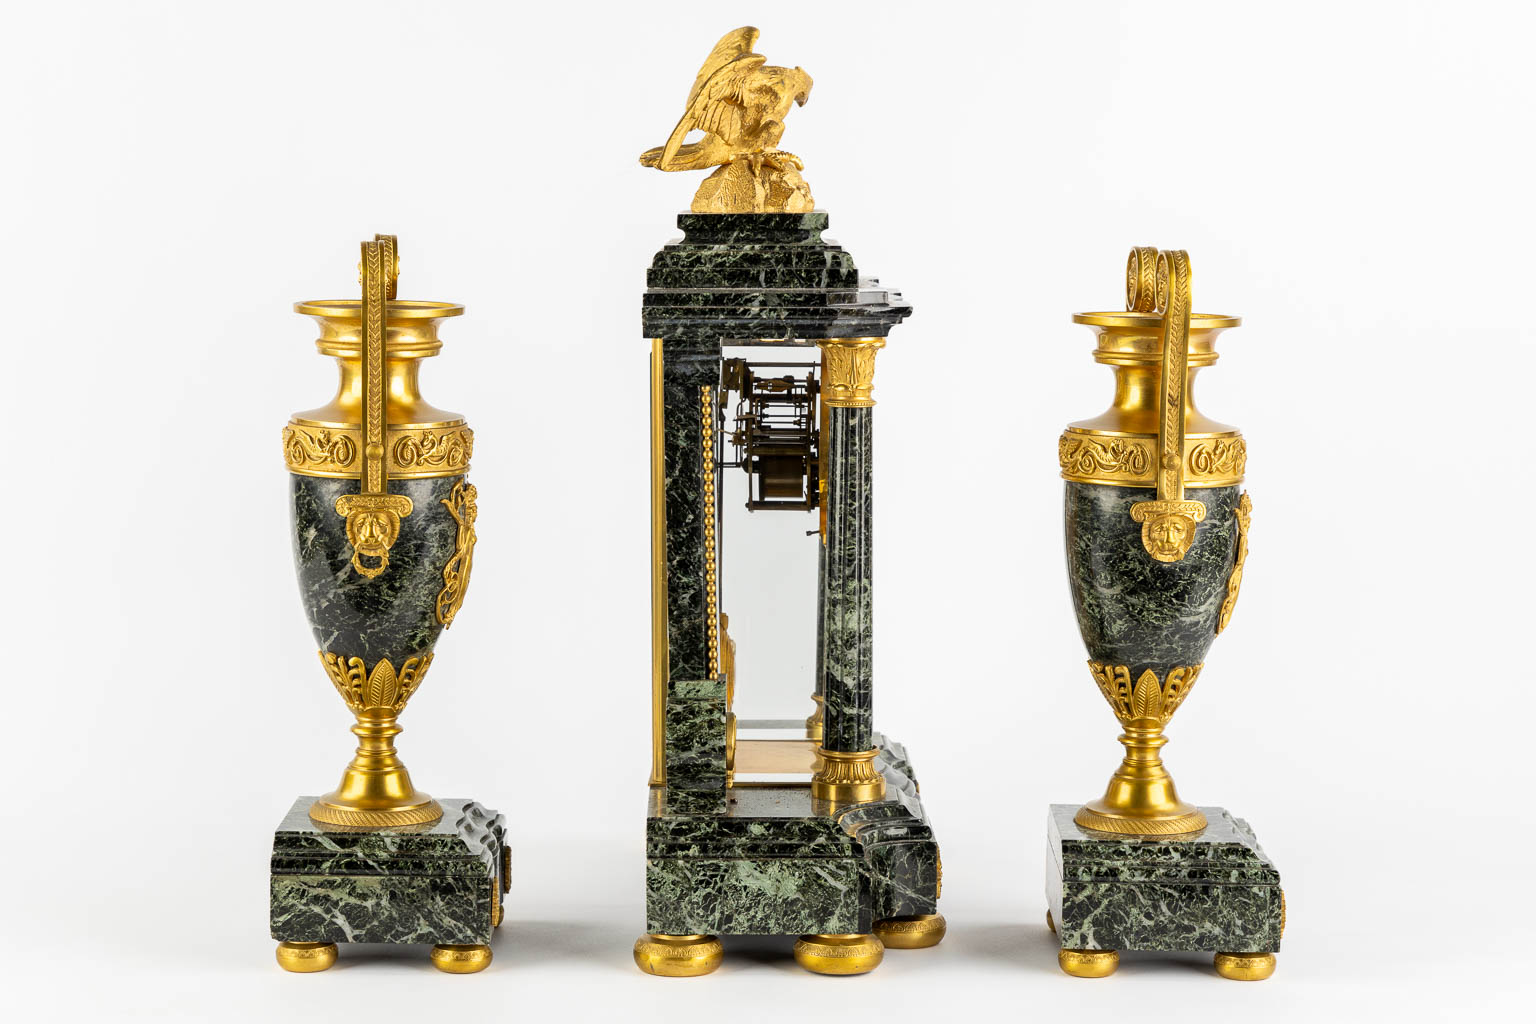 A three-piece mantle garniture clock and urns, gilt bronze on green marble, Empire style. France, 19th C. (L:16,5 x W:37 x H:51 